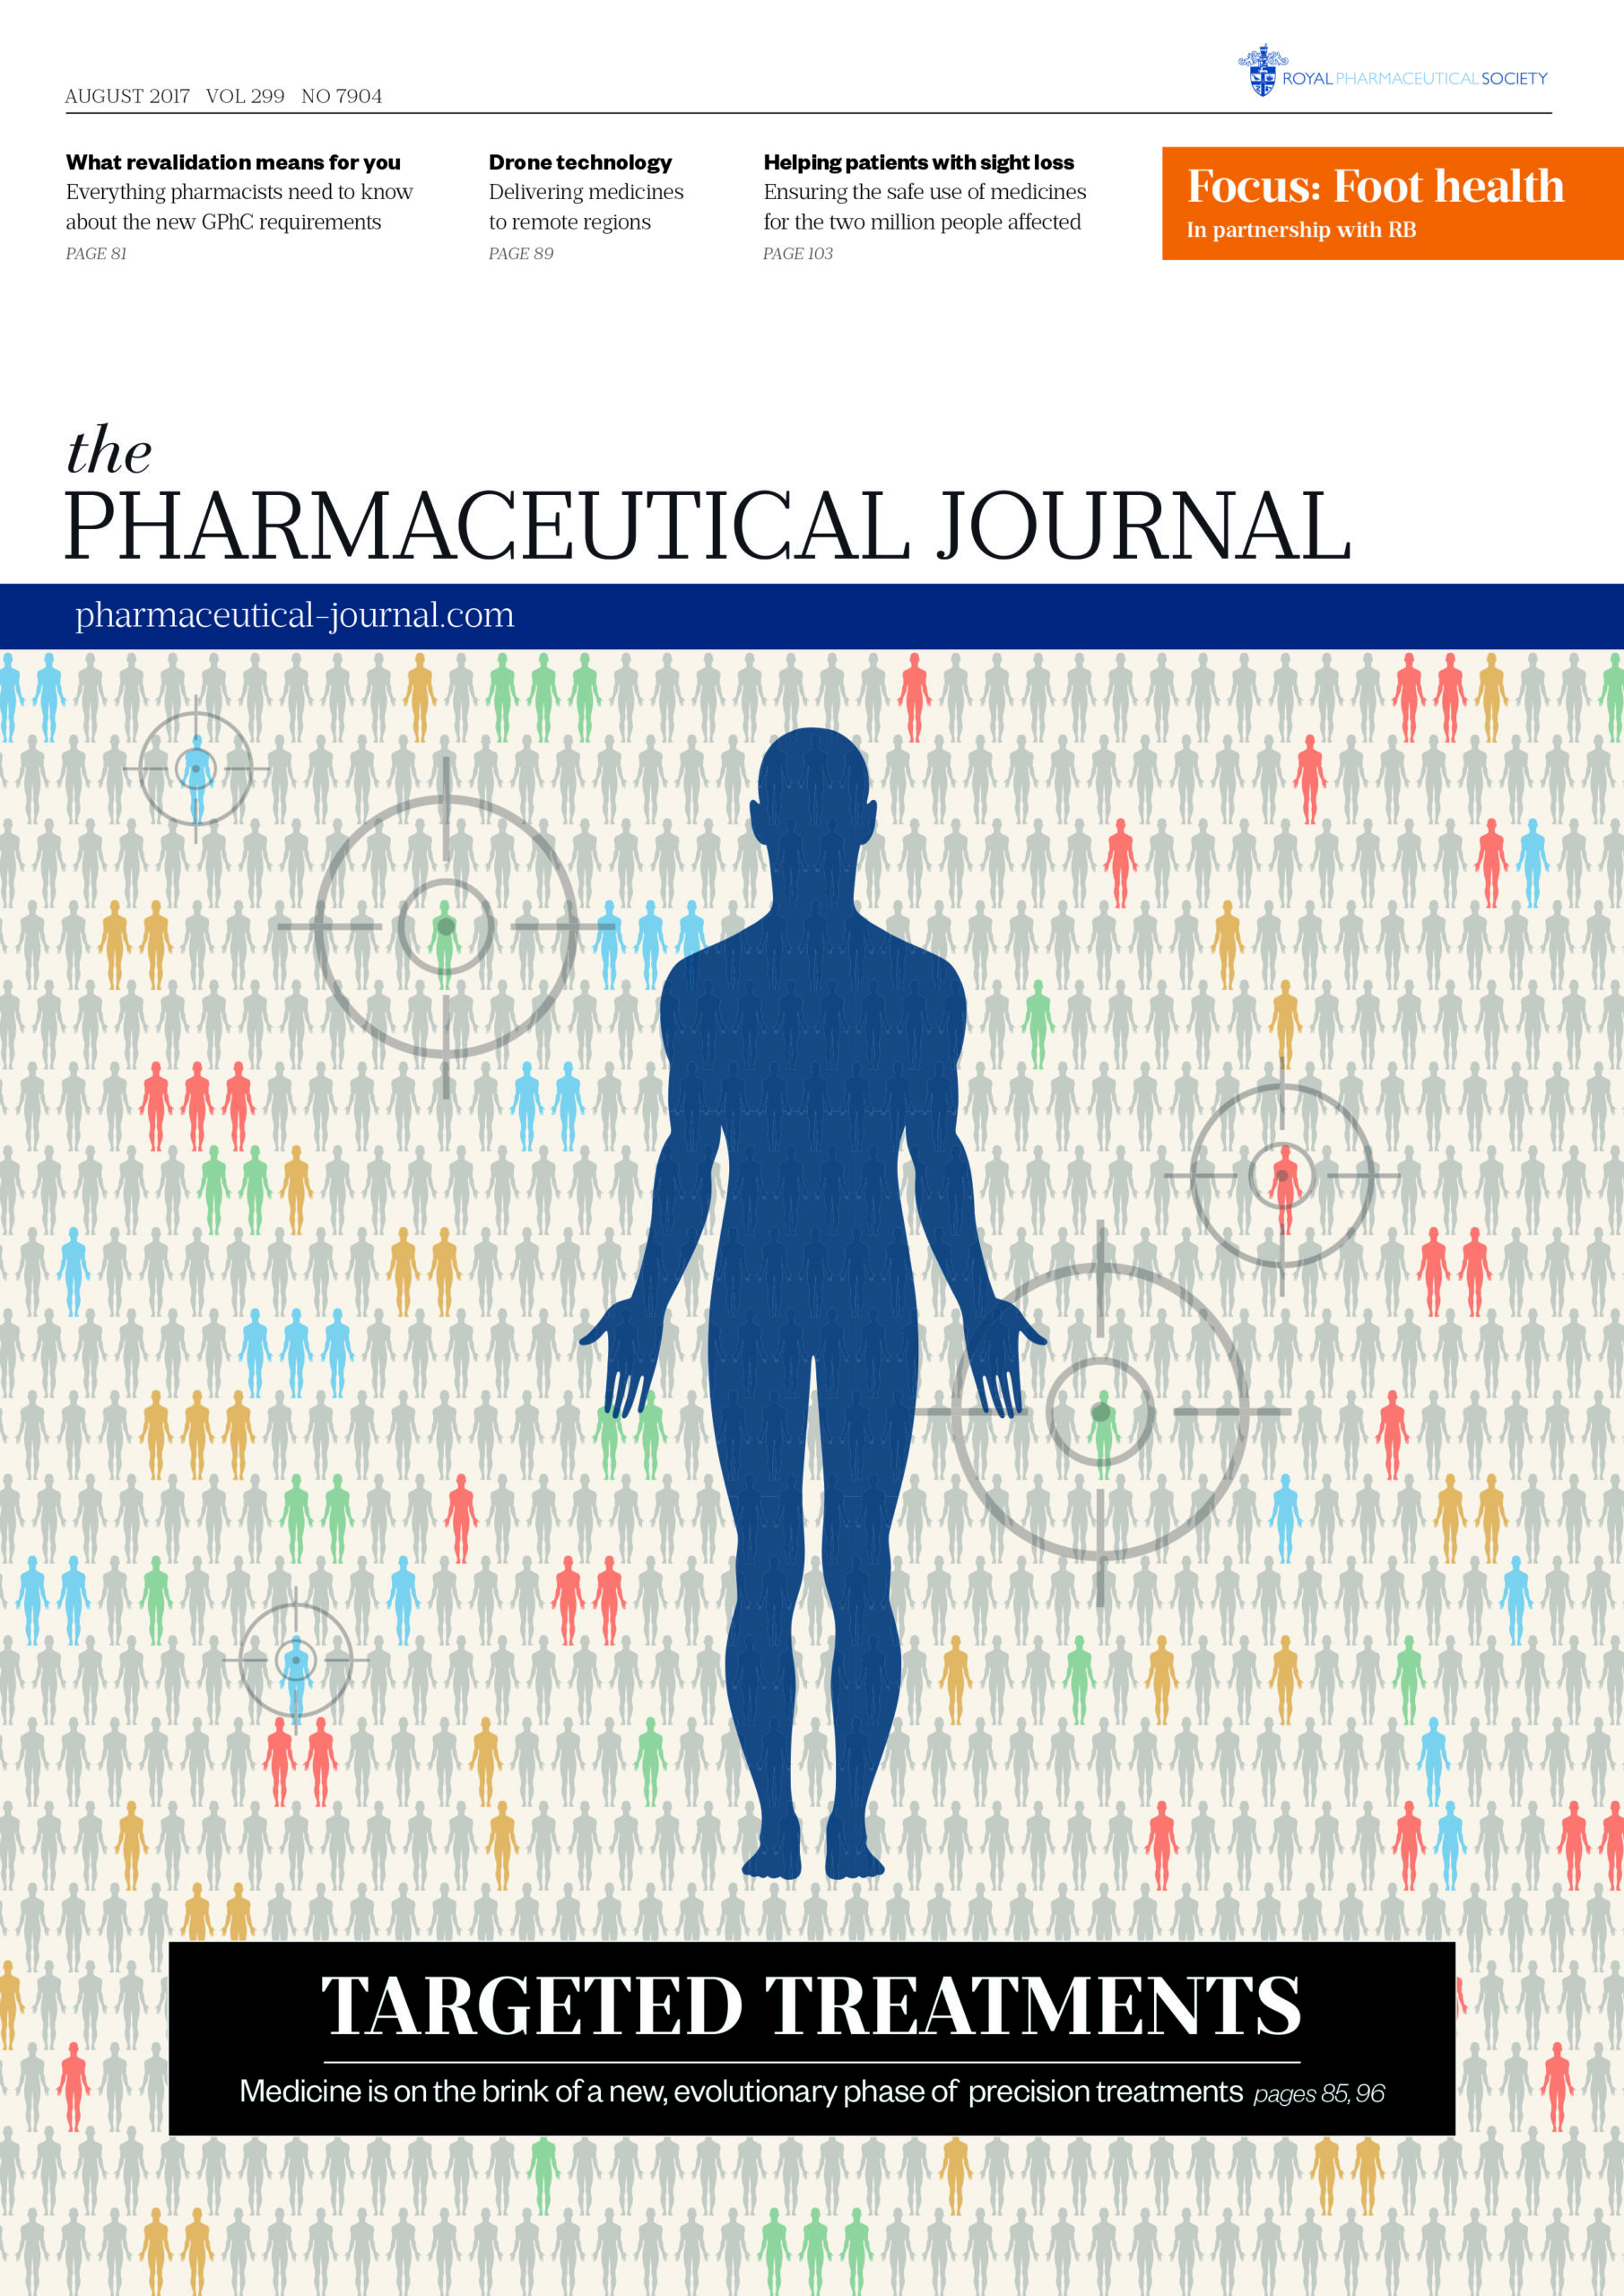 Publication issue cover for PJ, August 2017, Vol 299, 7904